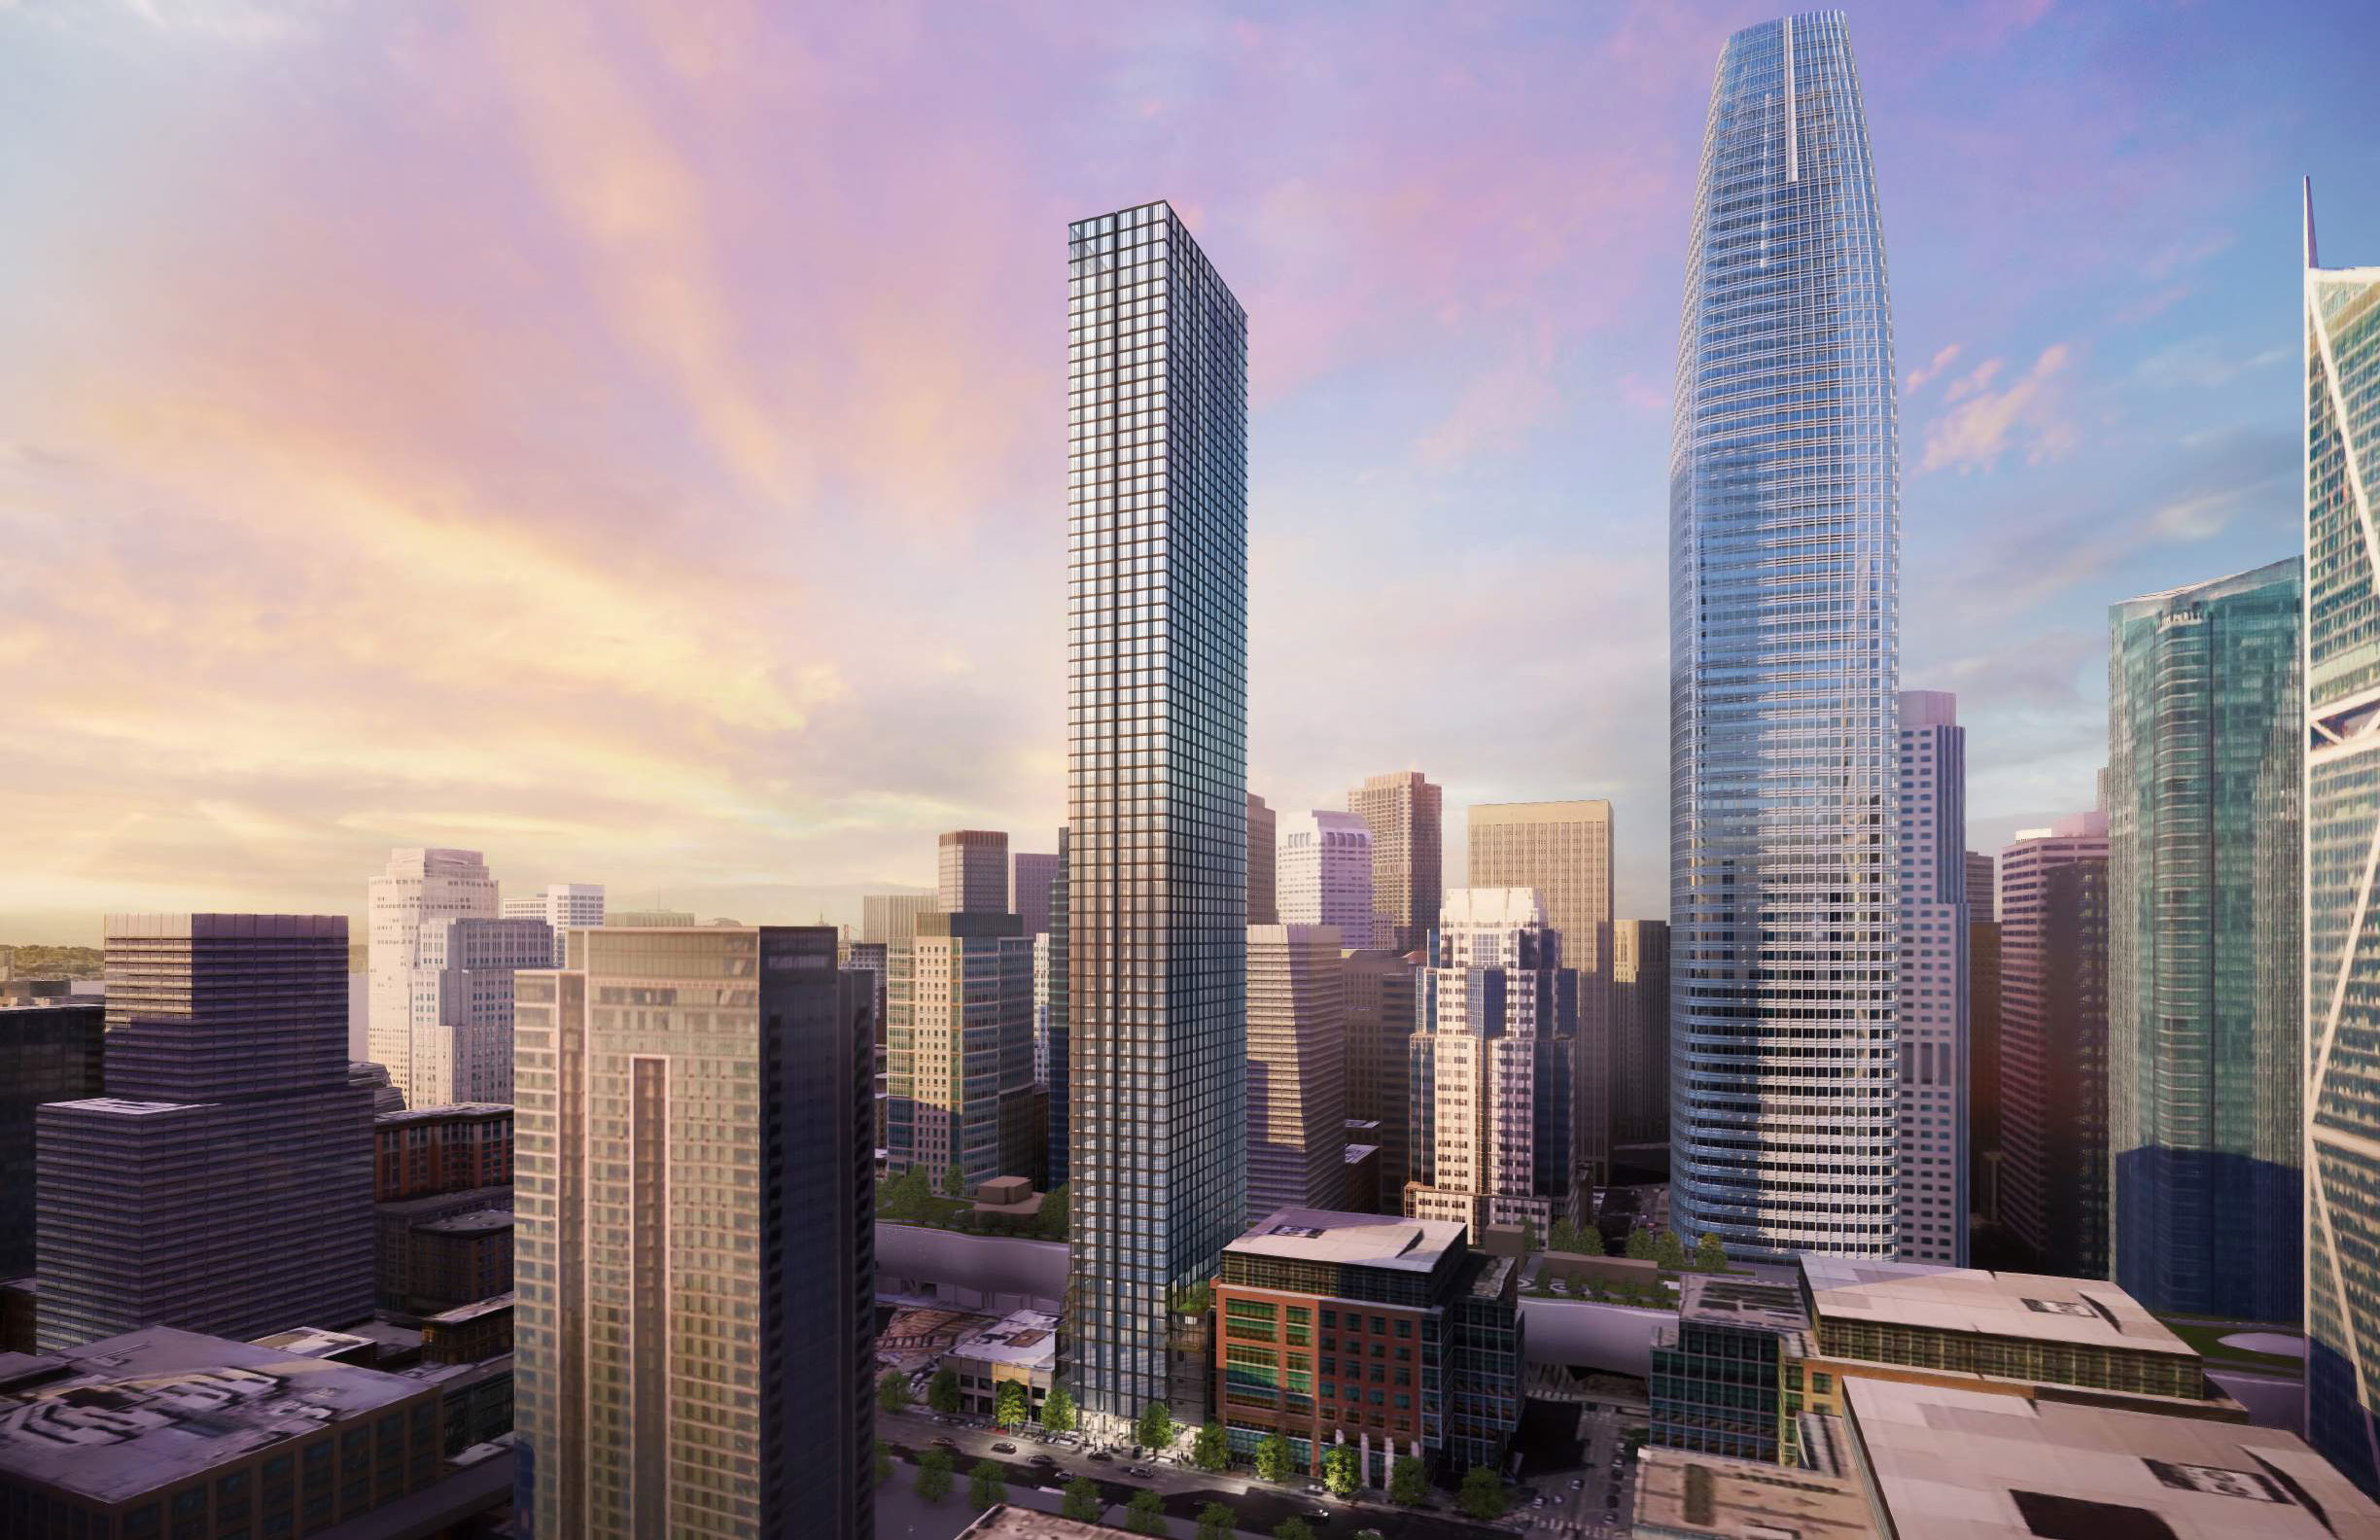 A rendering shows a tall, narrow tower rising up in the city's downtown.